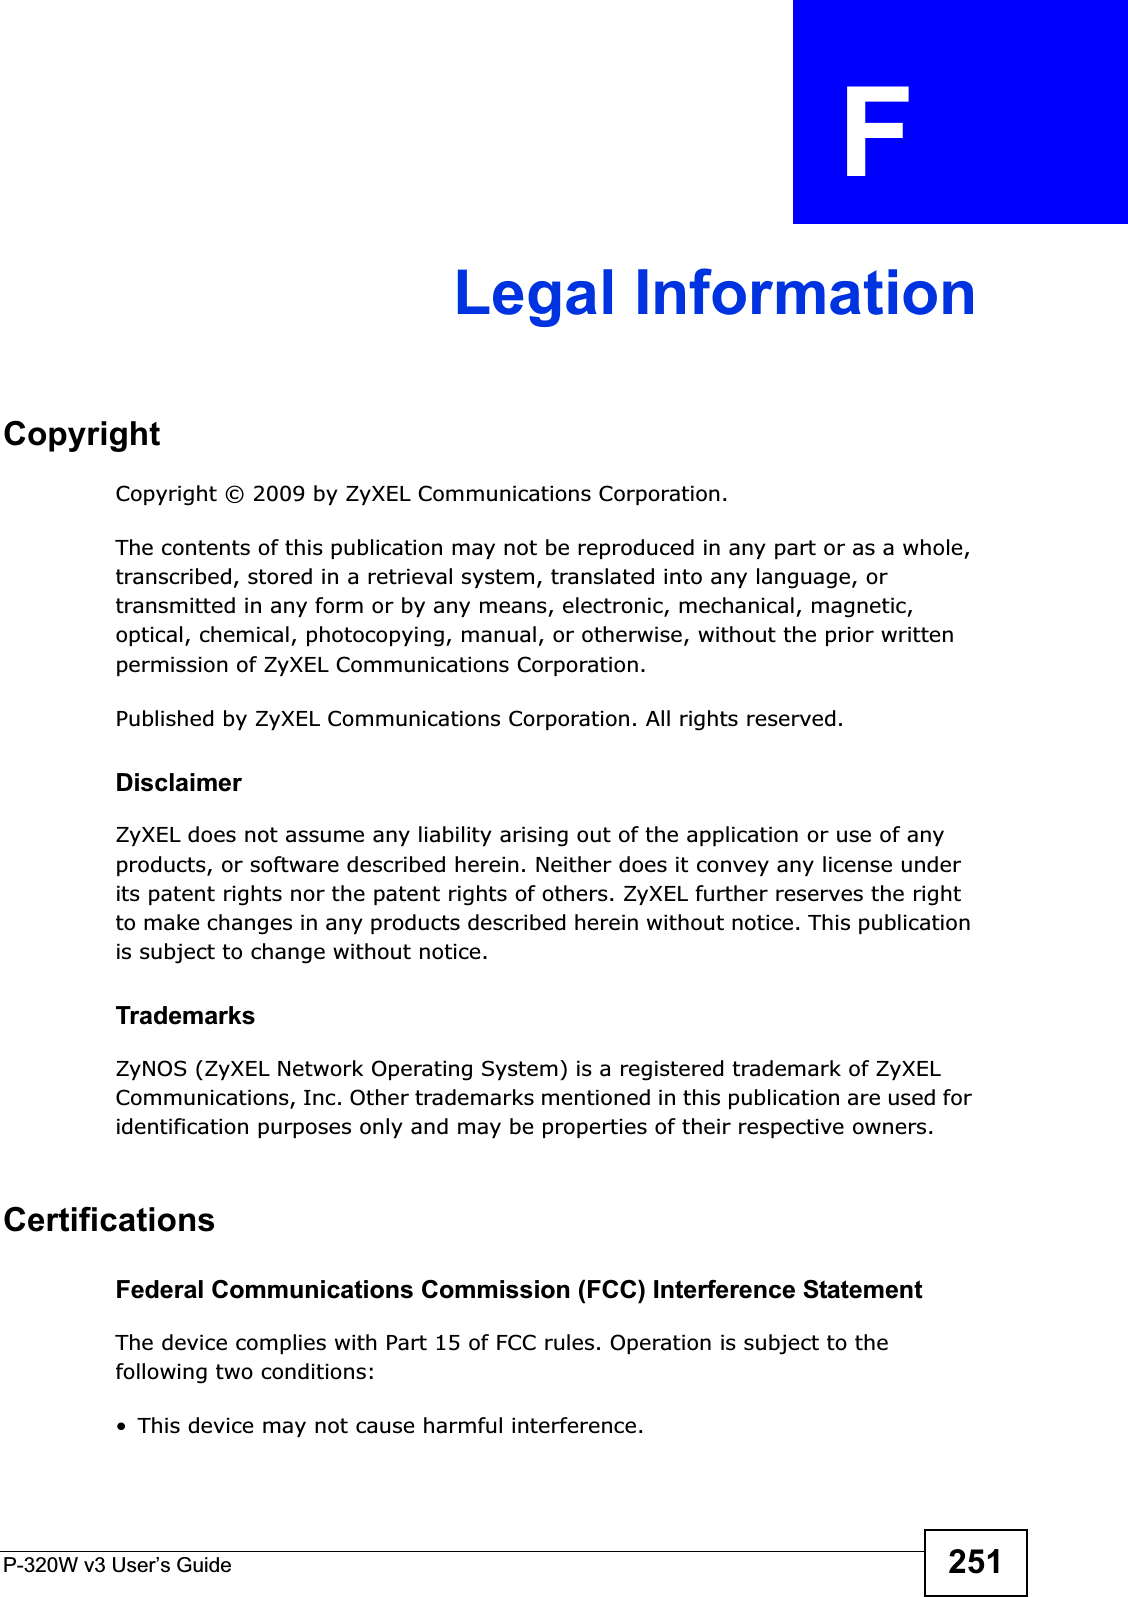 P-320W v3 User’s Guide 251APPENDIX  F Legal InformationCopyrightCopyright © 2009 by ZyXEL Communications Corporation.The contents of this publication may not be reproduced in any part or as a whole, transcribed, stored in a retrieval system, translated into any language, or transmitted in any form or by any means, electronic, mechanical, magnetic, optical, chemical, photocopying, manual, or otherwise, without the prior written permission of ZyXEL Communications Corporation.Published by ZyXEL Communications Corporation. All rights reserved.DisclaimerZyXEL does not assume any liability arising out of the application or use of any products, or software described herein. Neither does it convey any license under its patent rights nor the patent rights of others. ZyXEL further reserves the right to make changes in any products described herein without notice. This publication is subject to change without notice.TrademarksZyNOS (ZyXEL Network Operating System) is a registered trademark of ZyXEL Communications, Inc. Other trademarks mentioned in this publication are used for identification purposes only and may be properties of their respective owners.CertificationsFederal Communications Commission (FCC) Interference StatementThe device complies with Part 15 of FCC rules. Operation is subject to the following two conditions:• This device may not cause harmful interference.